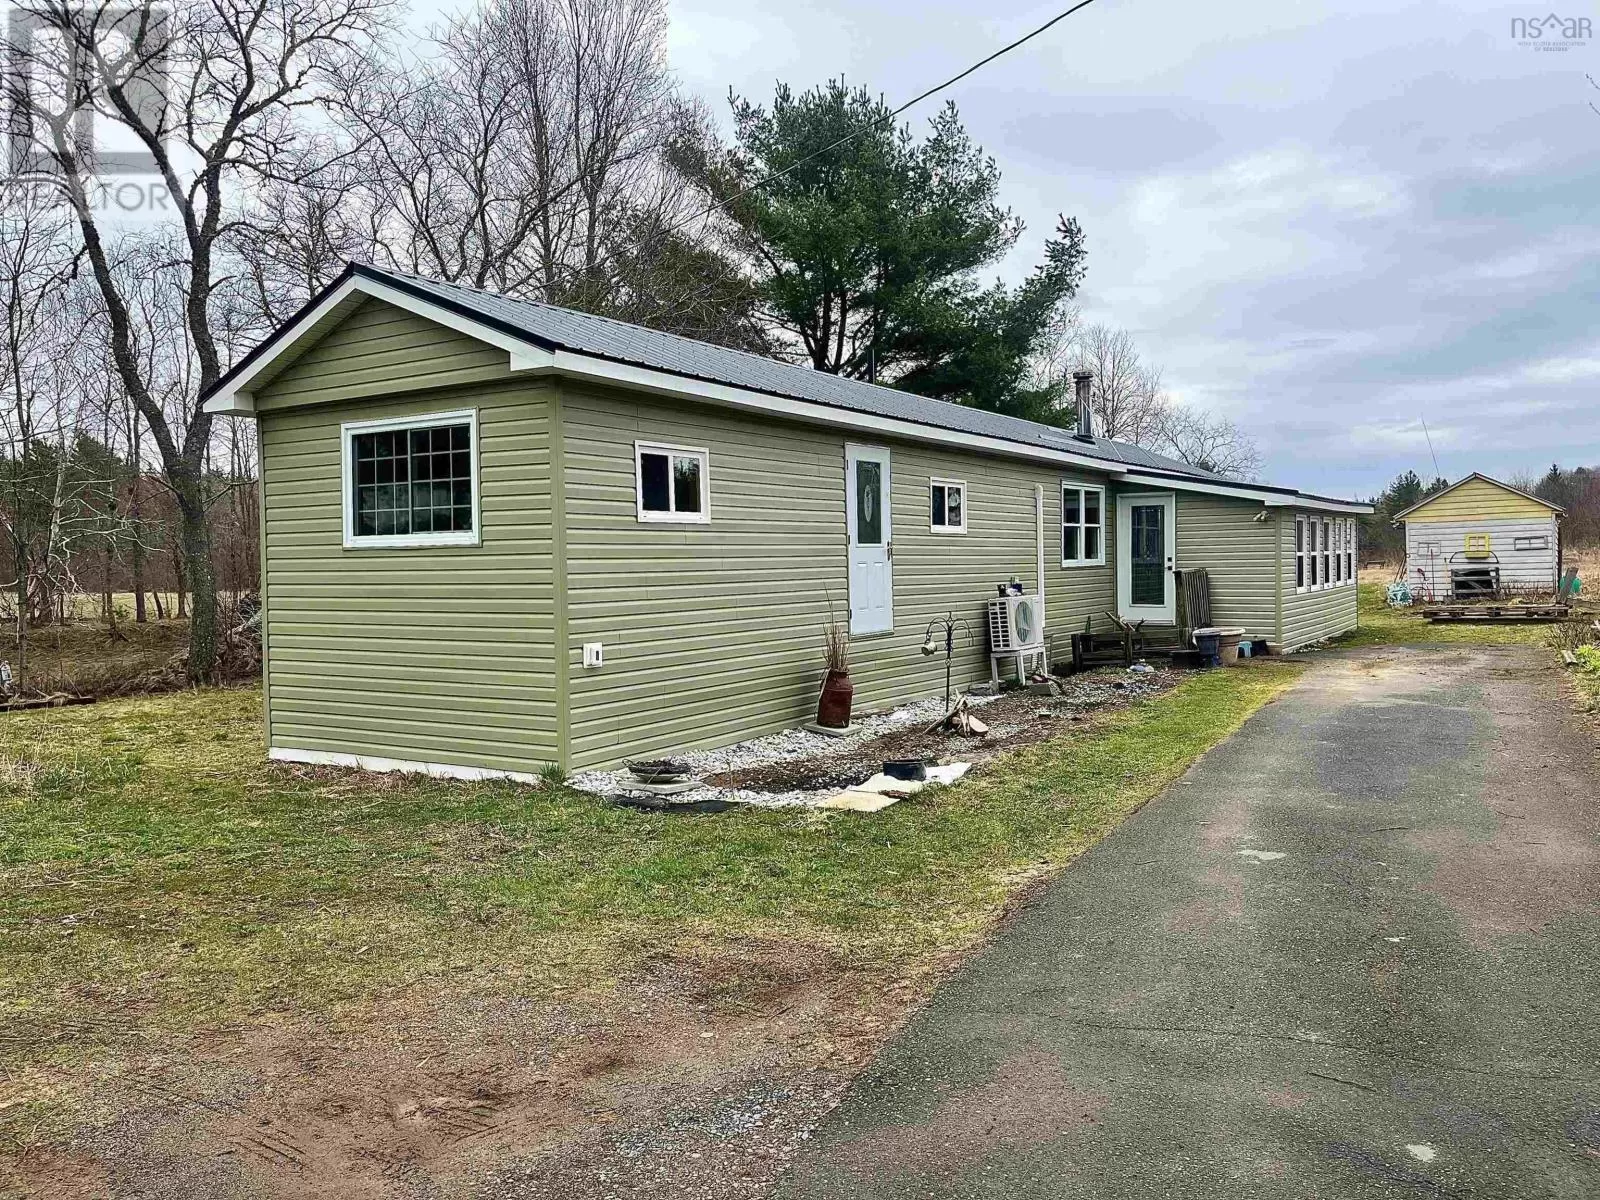 Mobile Home for rent: 737 Highway 236, Stanley, Nova Scotia B0N 2A0